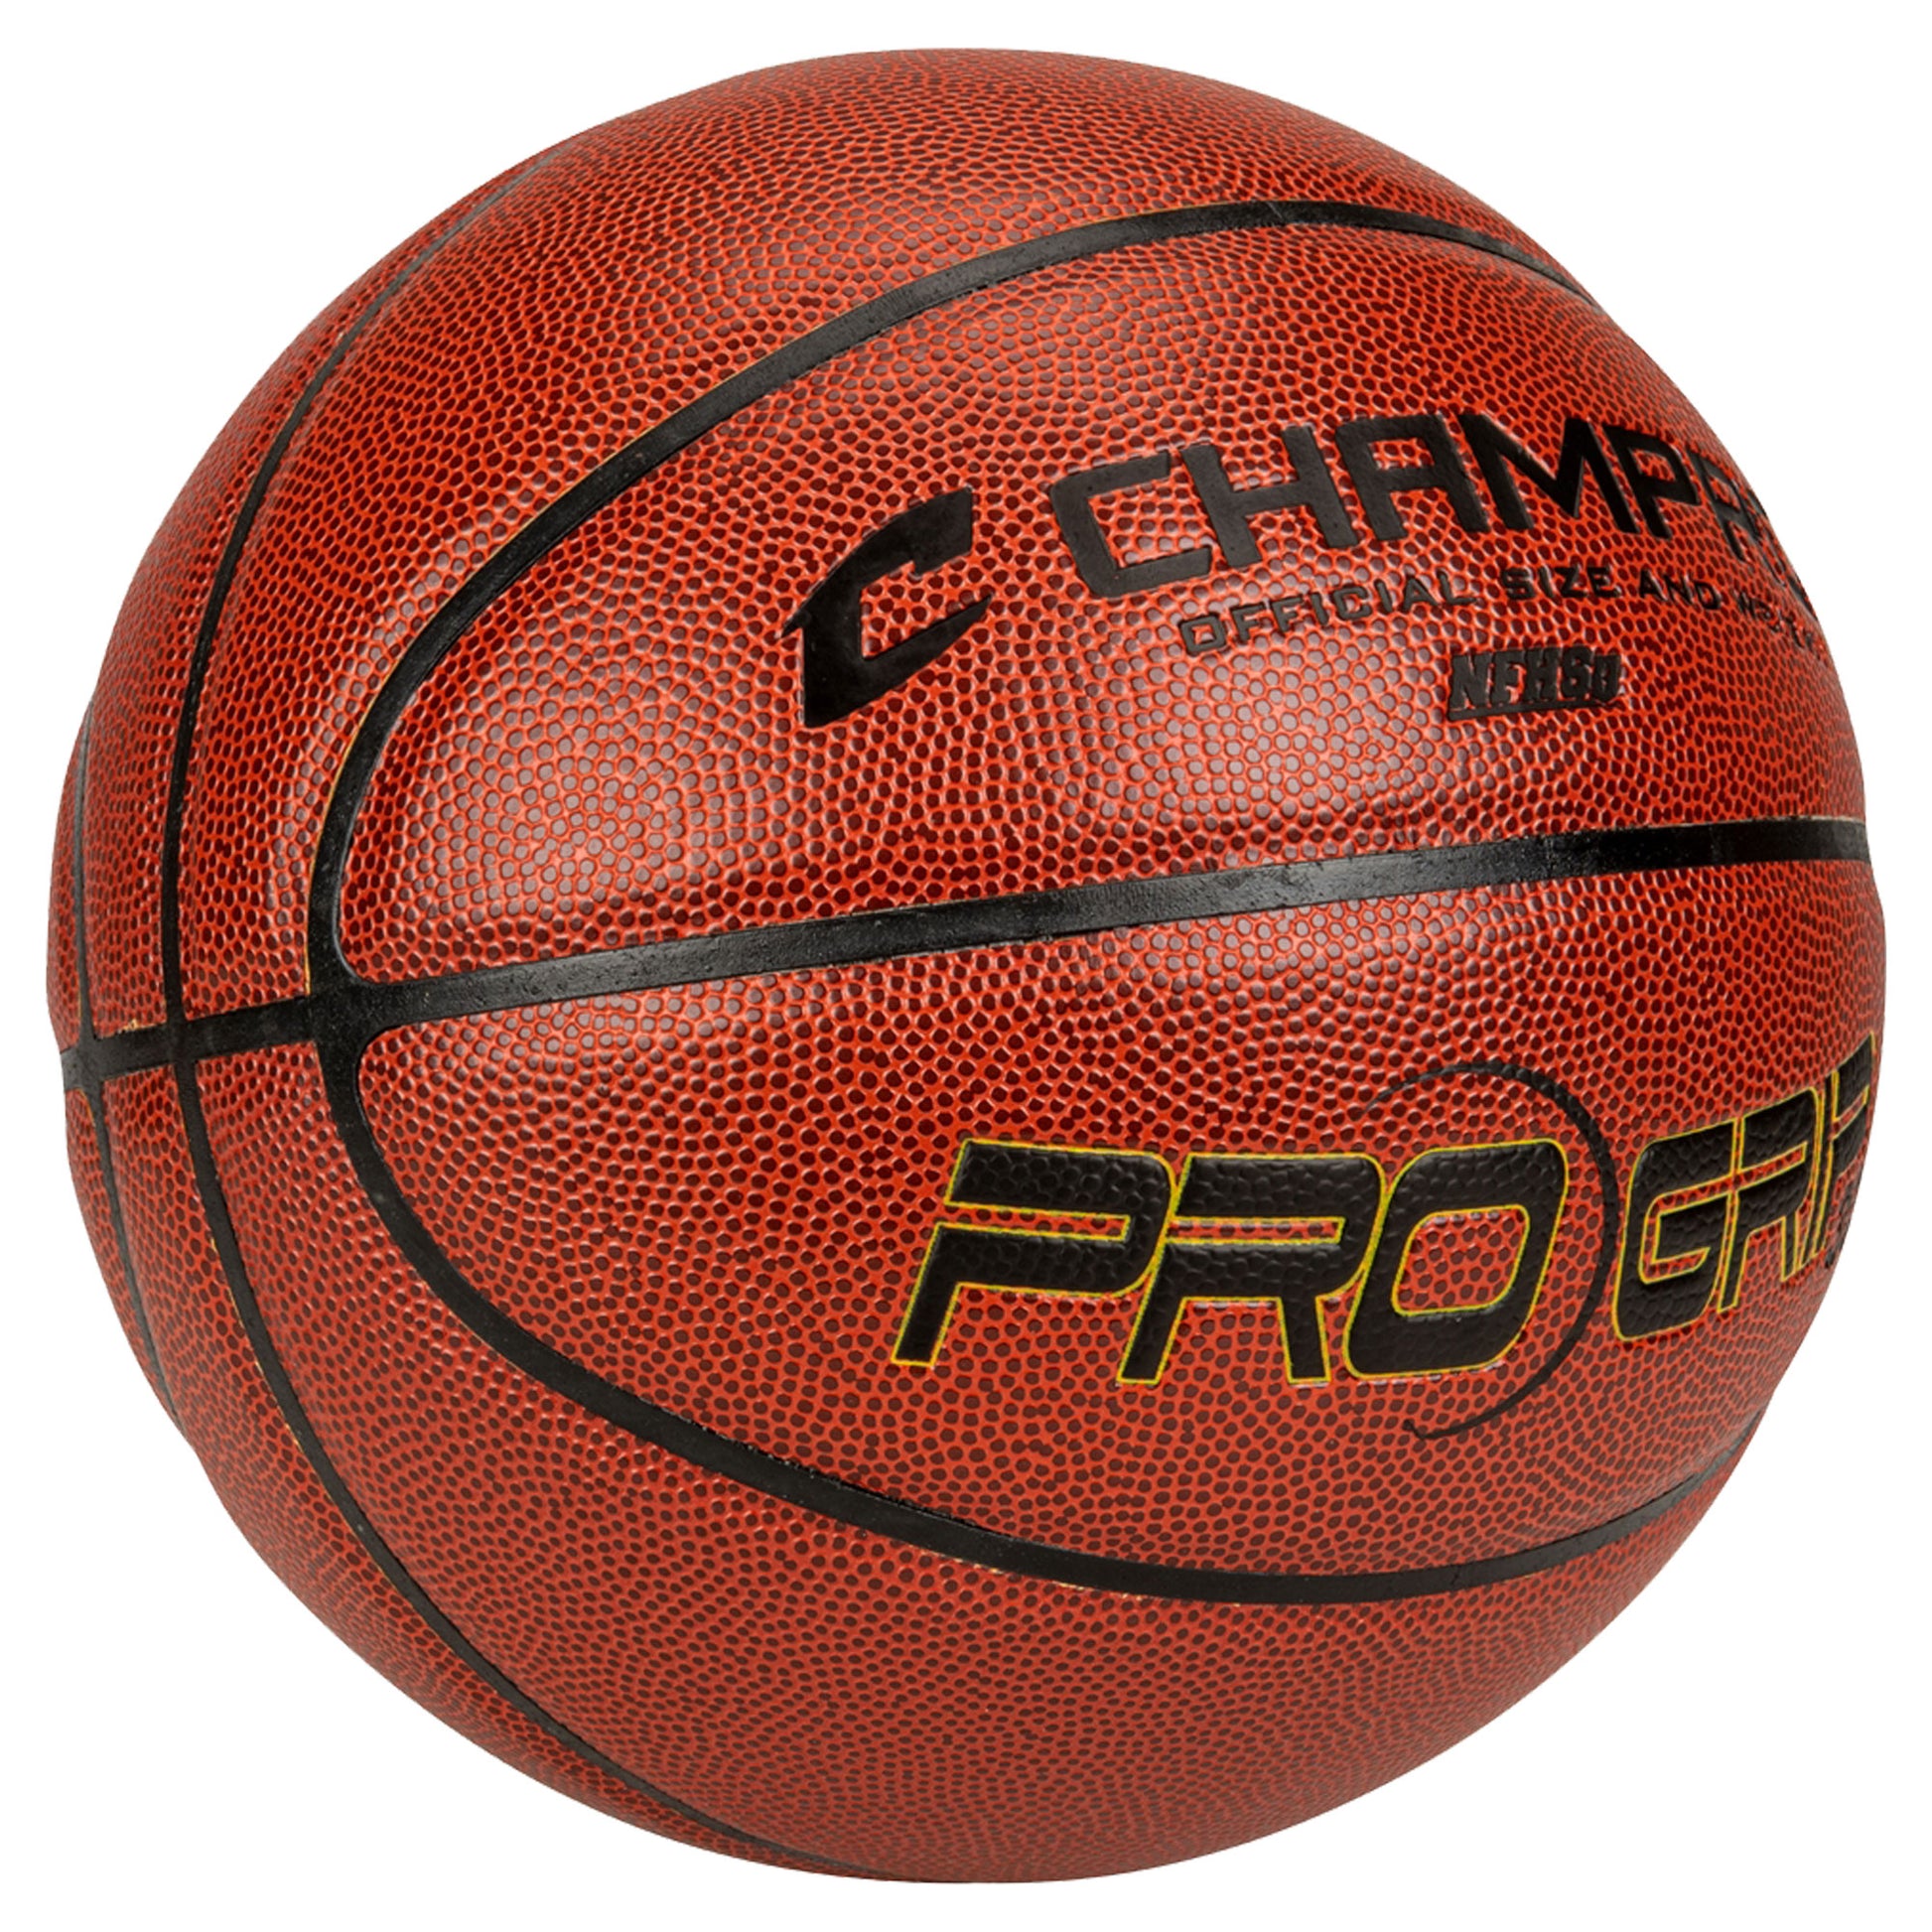 Champro Sports Progrip 3000 High Performance Indoor Composite